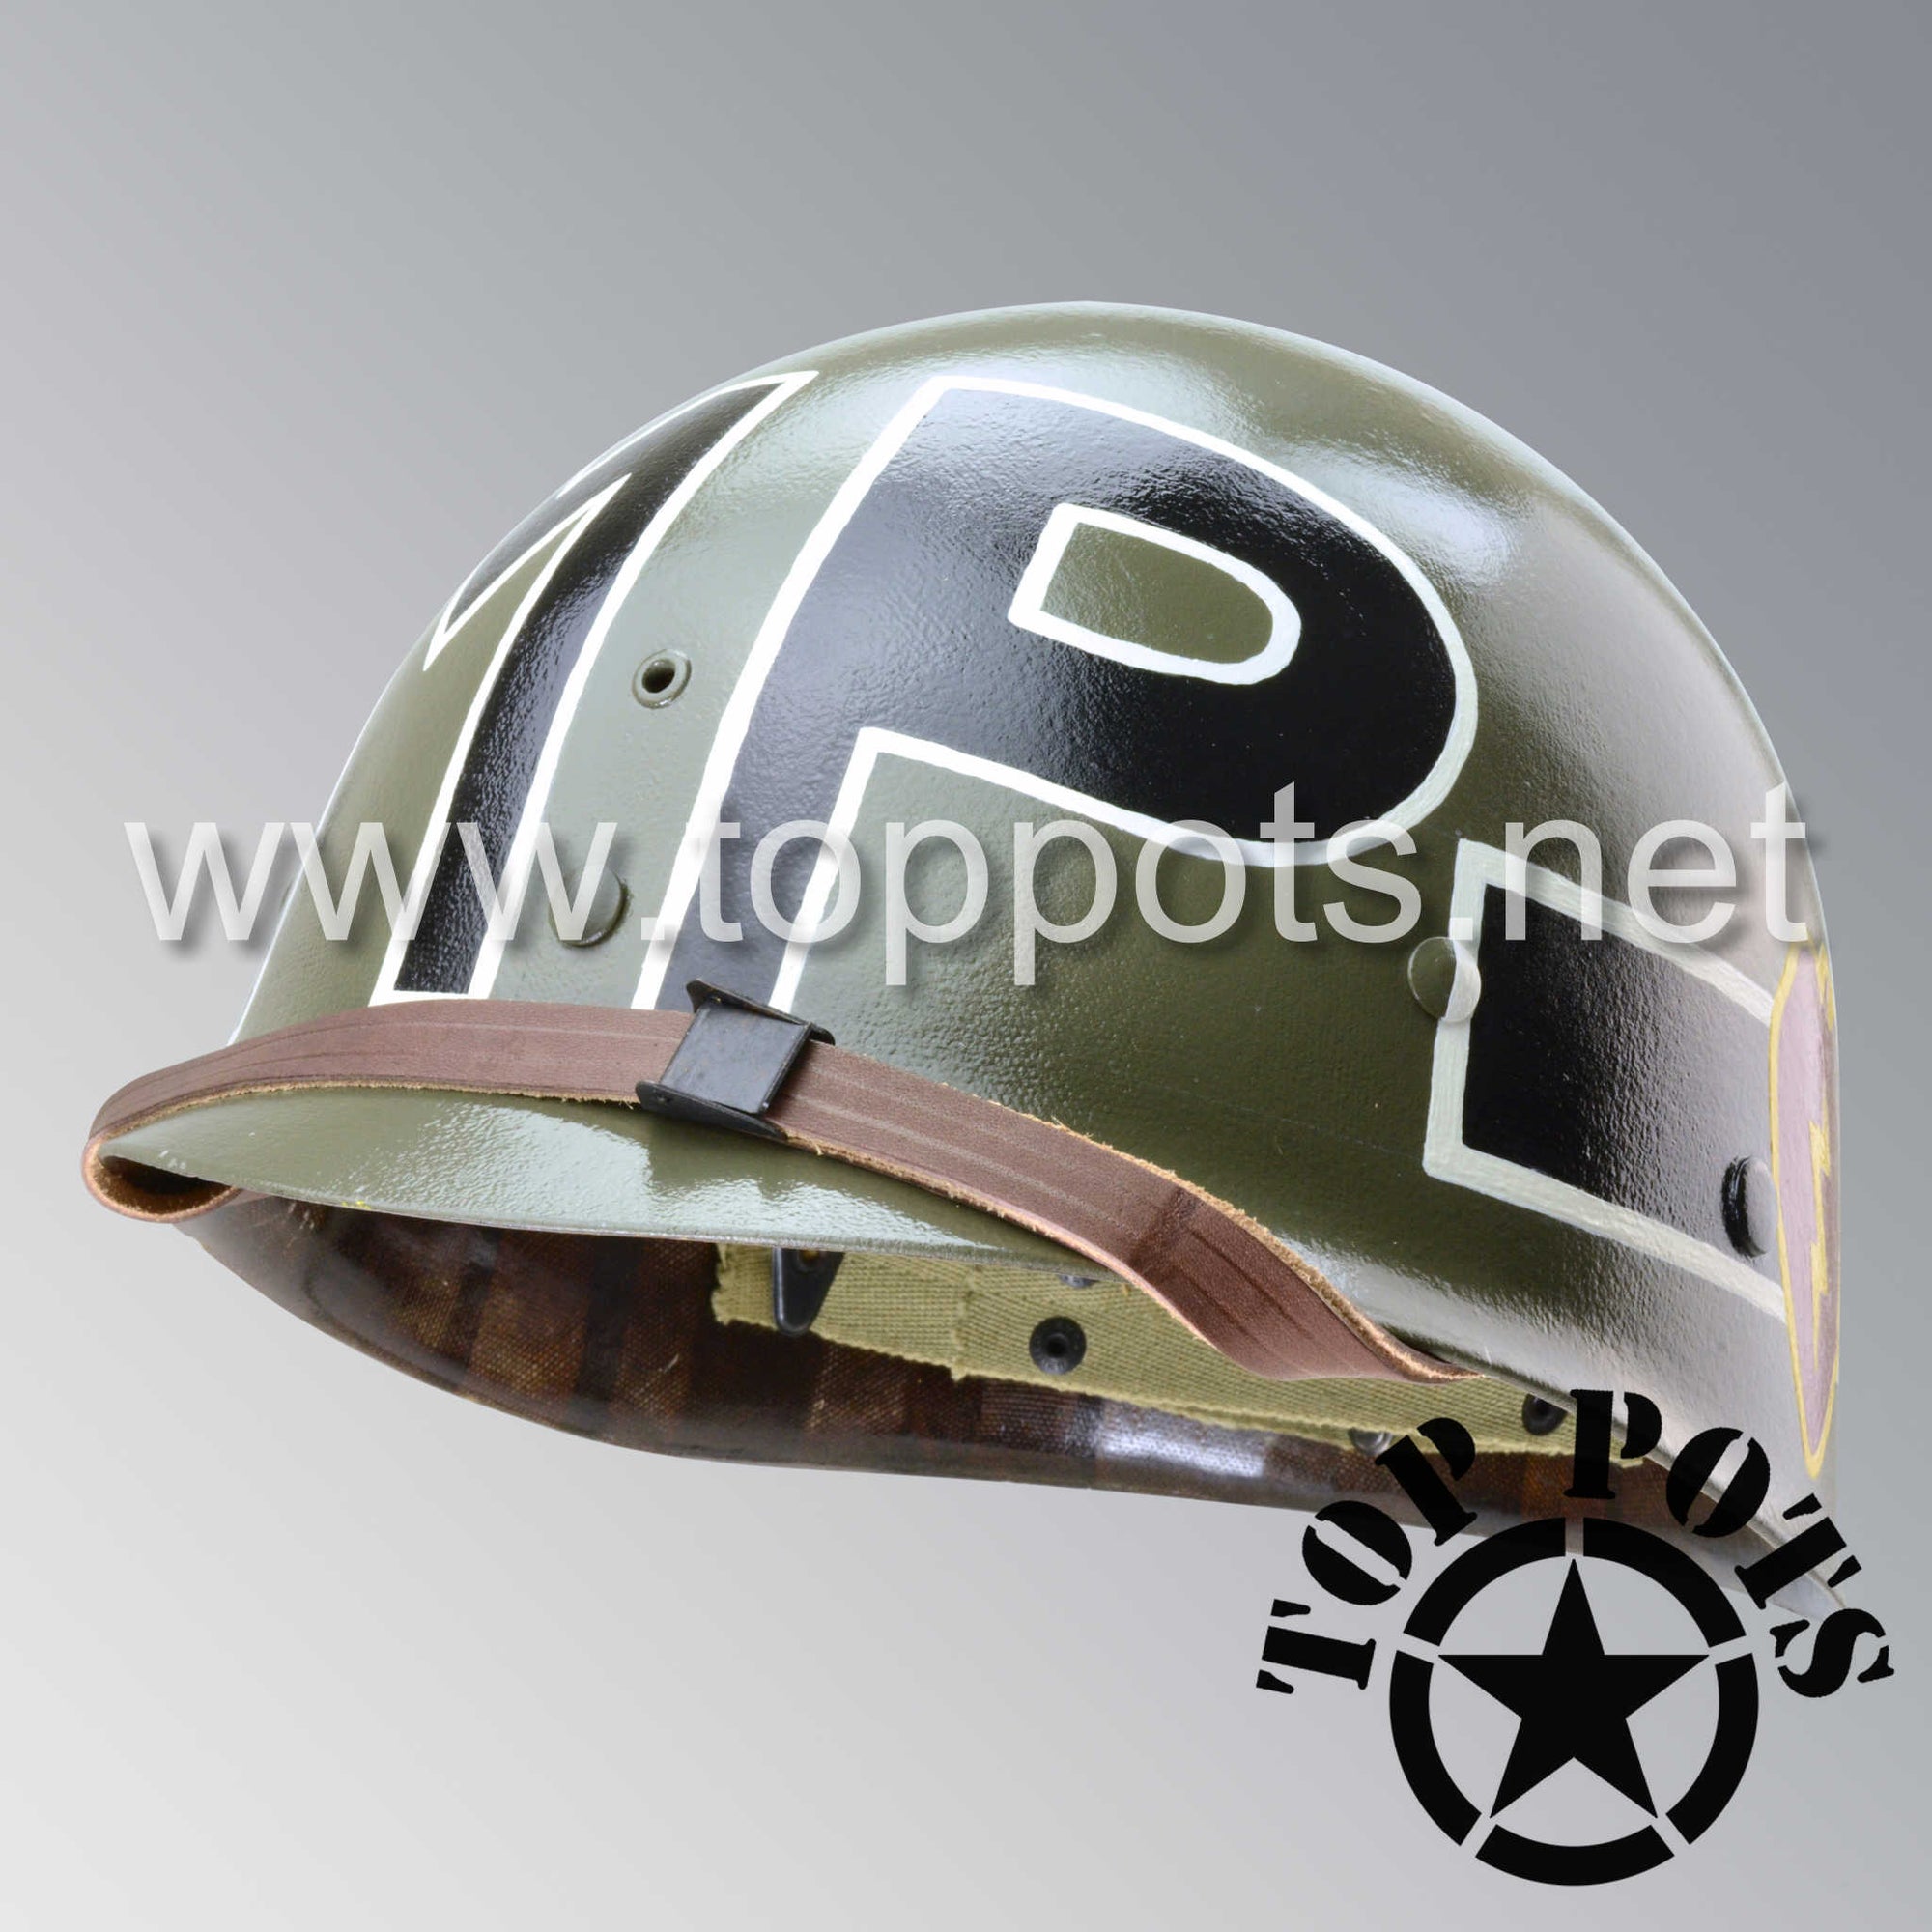 Korean War US Army Restored Original M1 Infantry Helmet Liner with 25th MP Military Police Company 25th Infantry Division Emblem